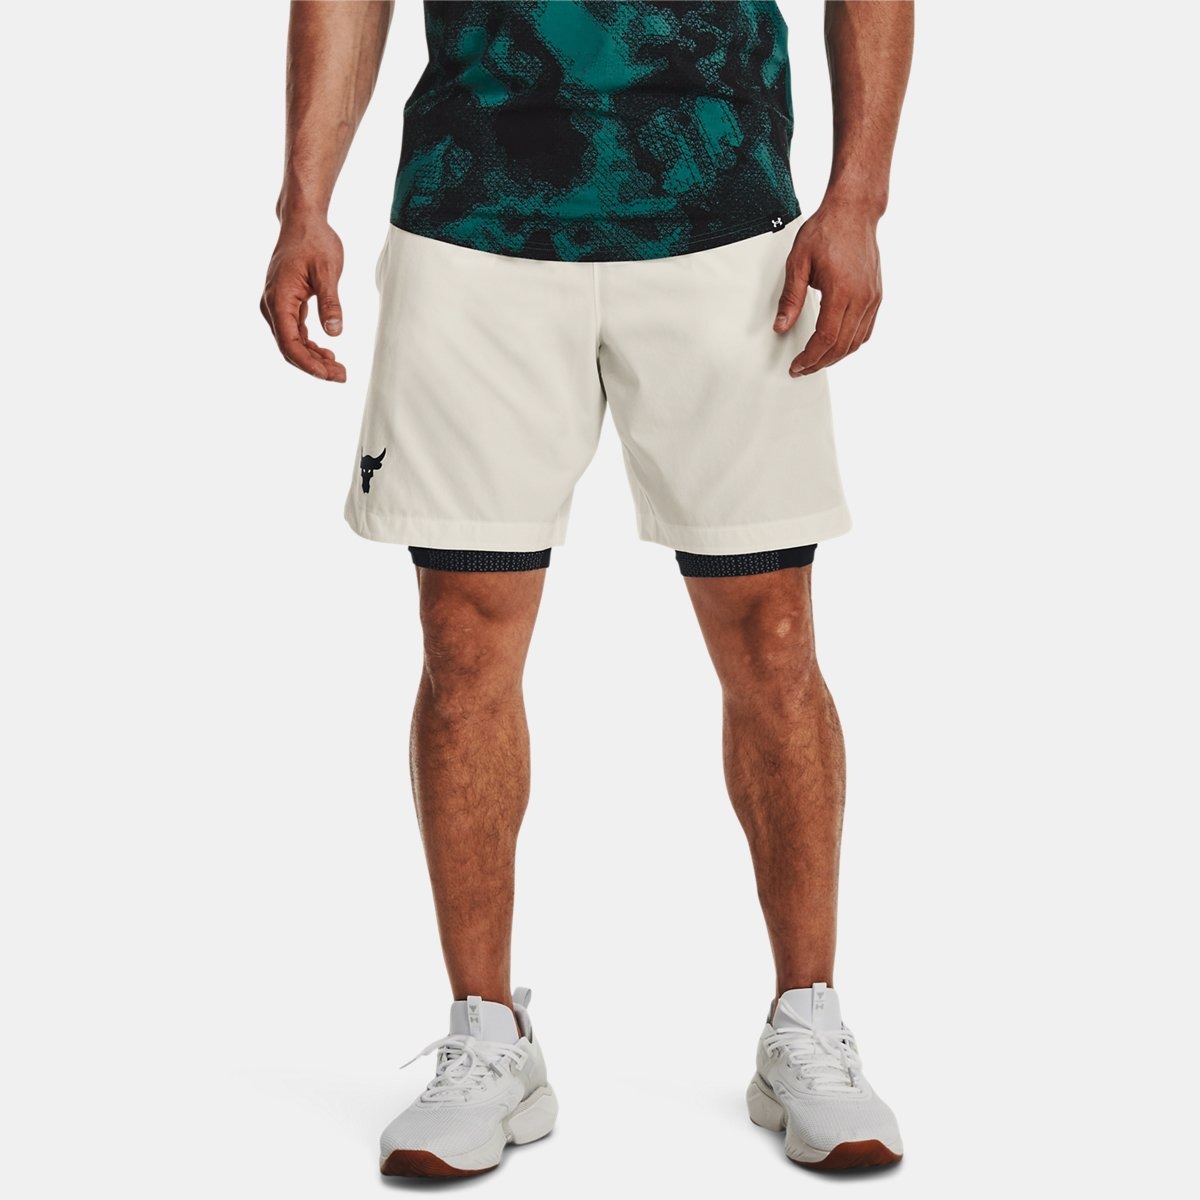 Shorts in White for Men at Under Armour GOOFASH